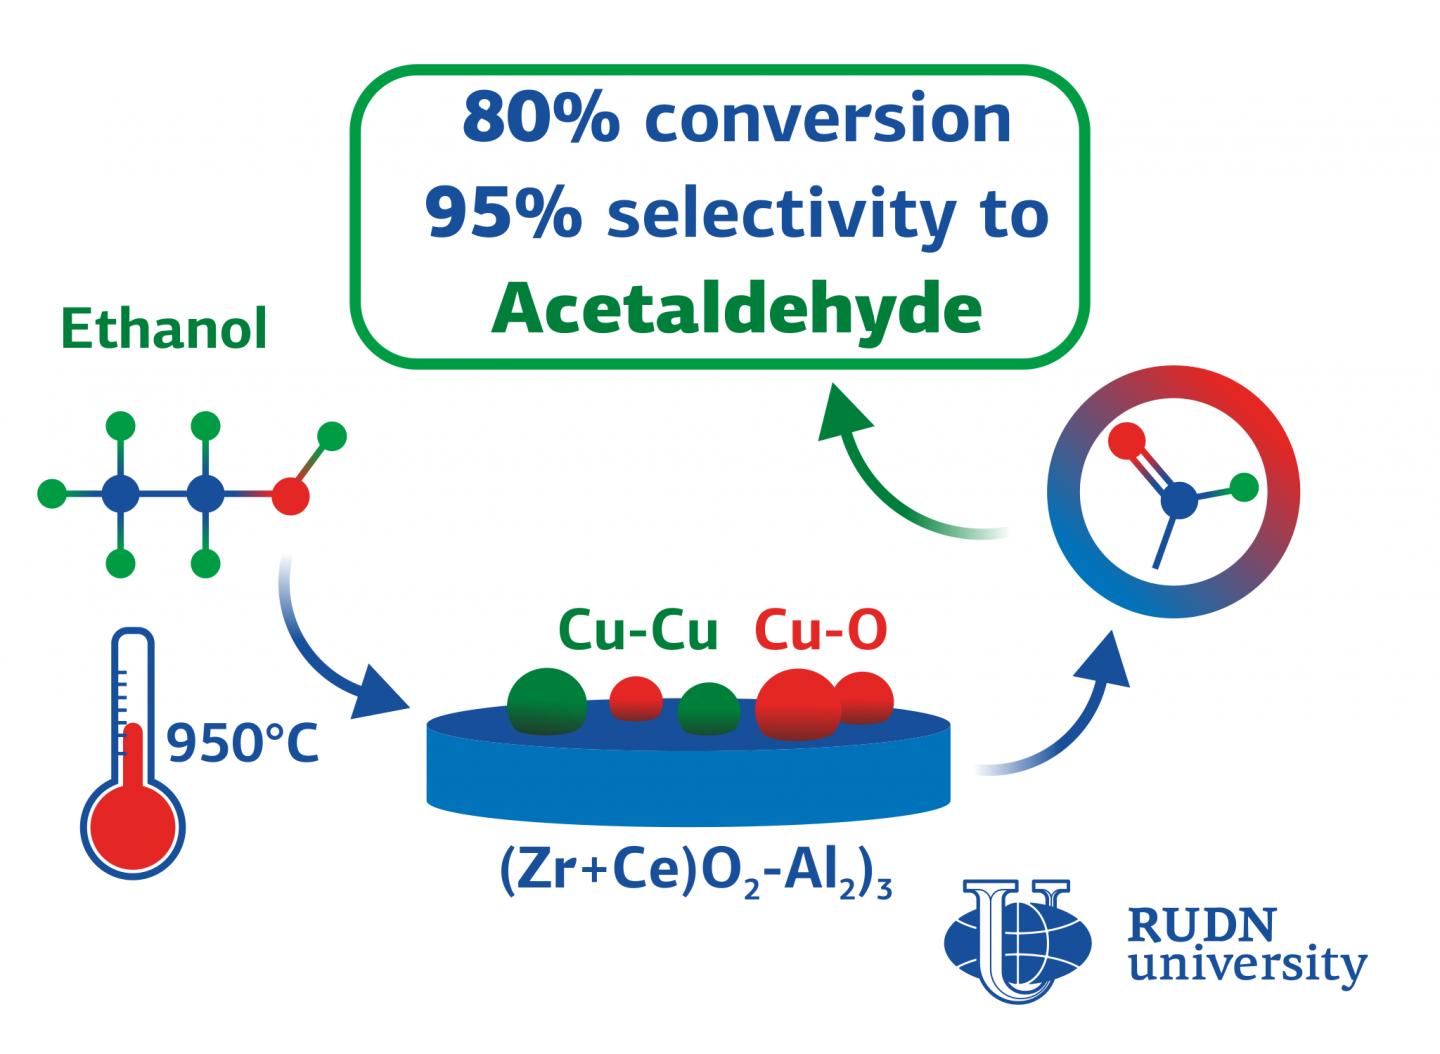 RUDN University chemists created cheap catalysts for ethanol conversion